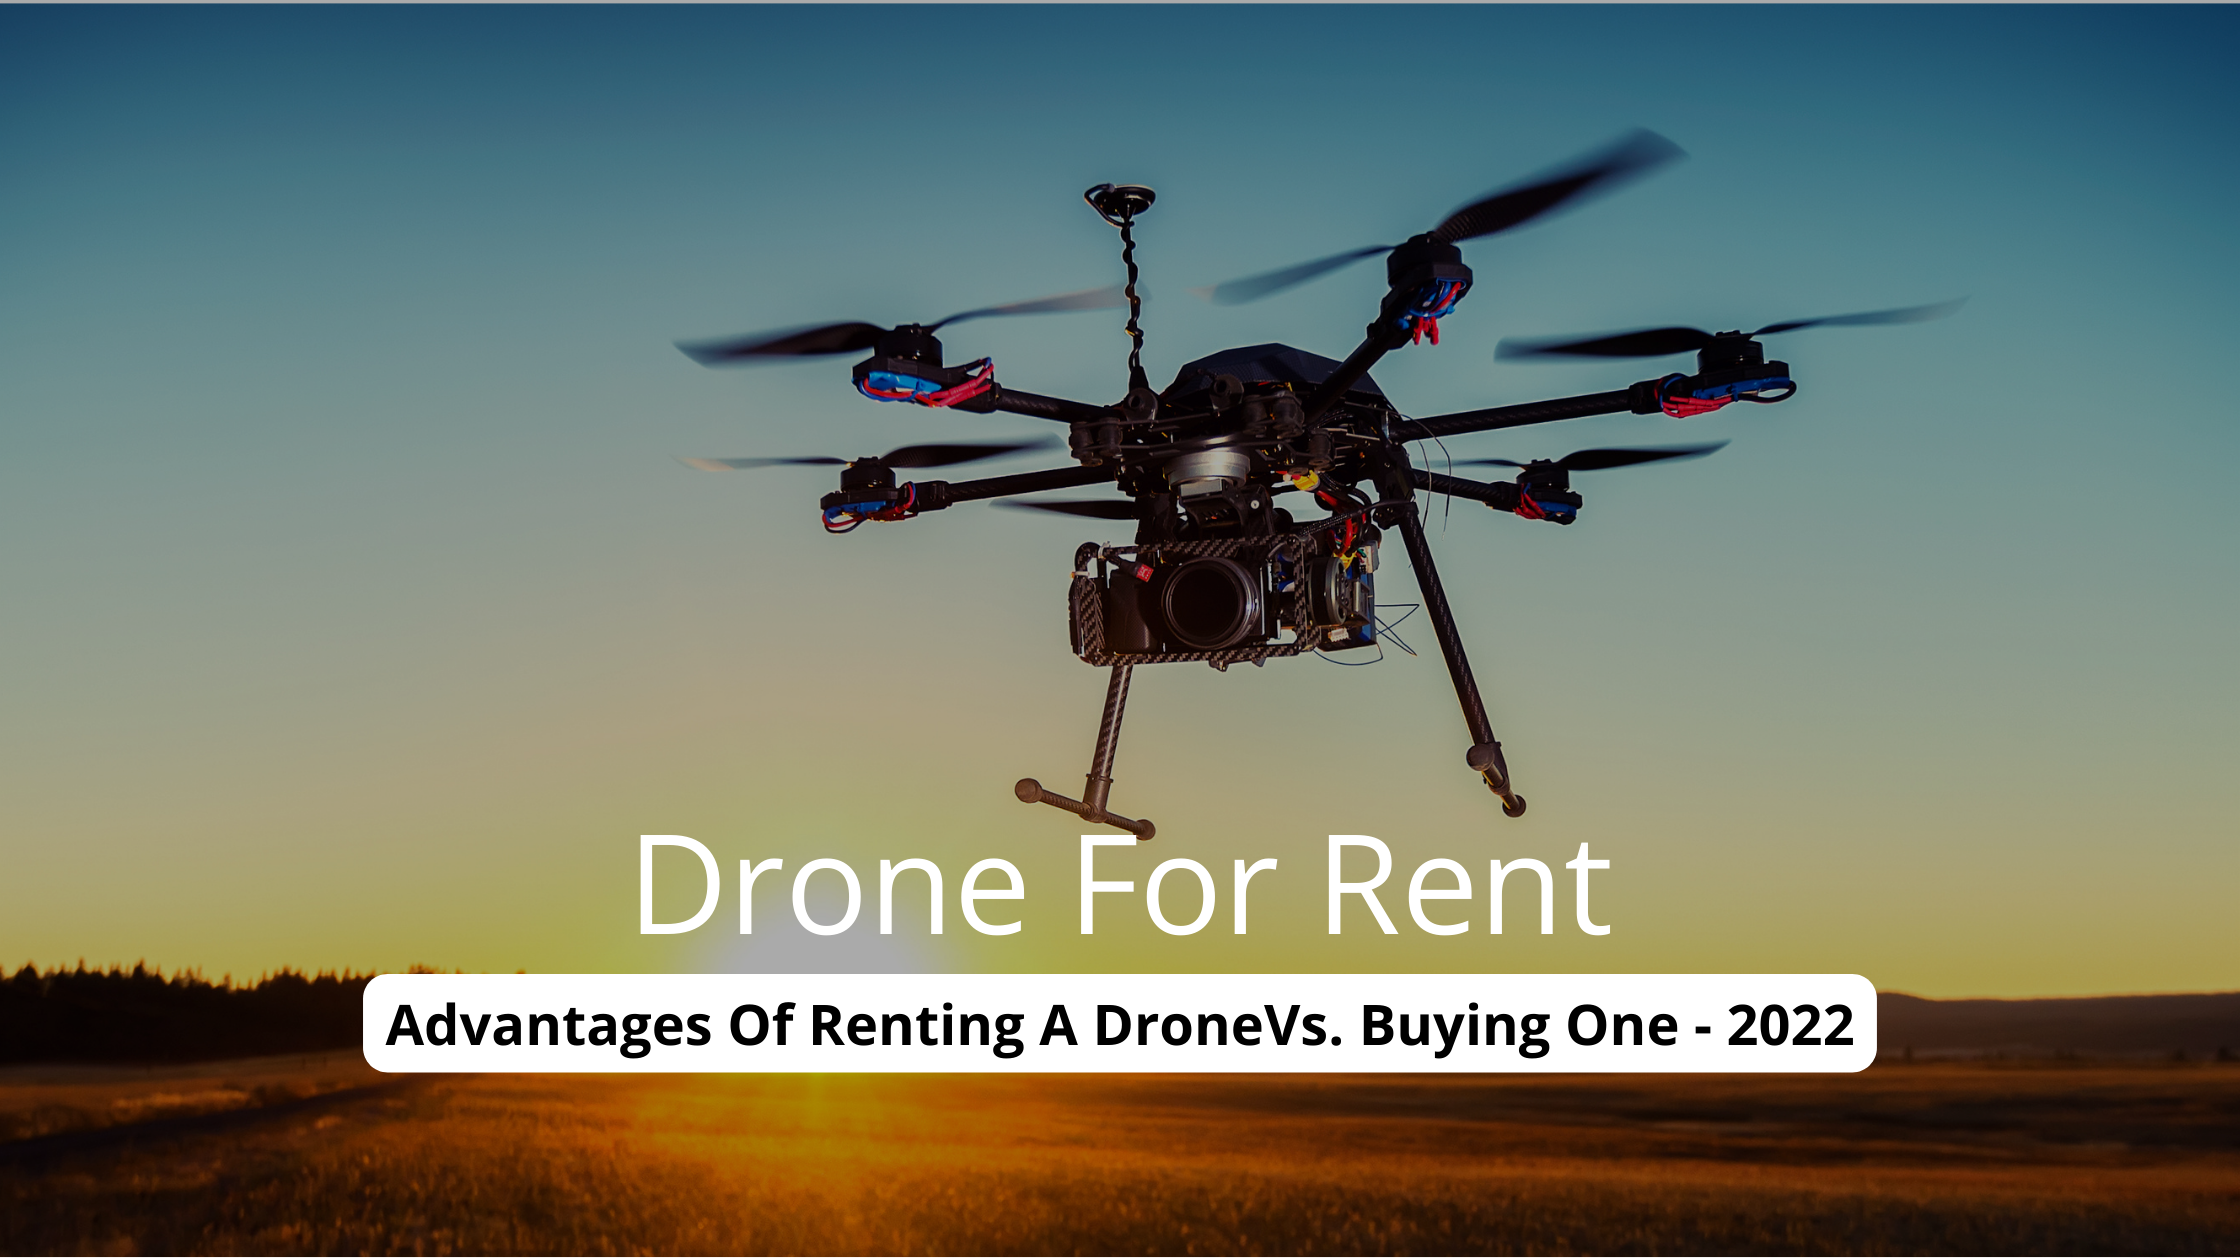 Drone For Rent: Advantages Of Renting A DroneVs. Buying One - 2022